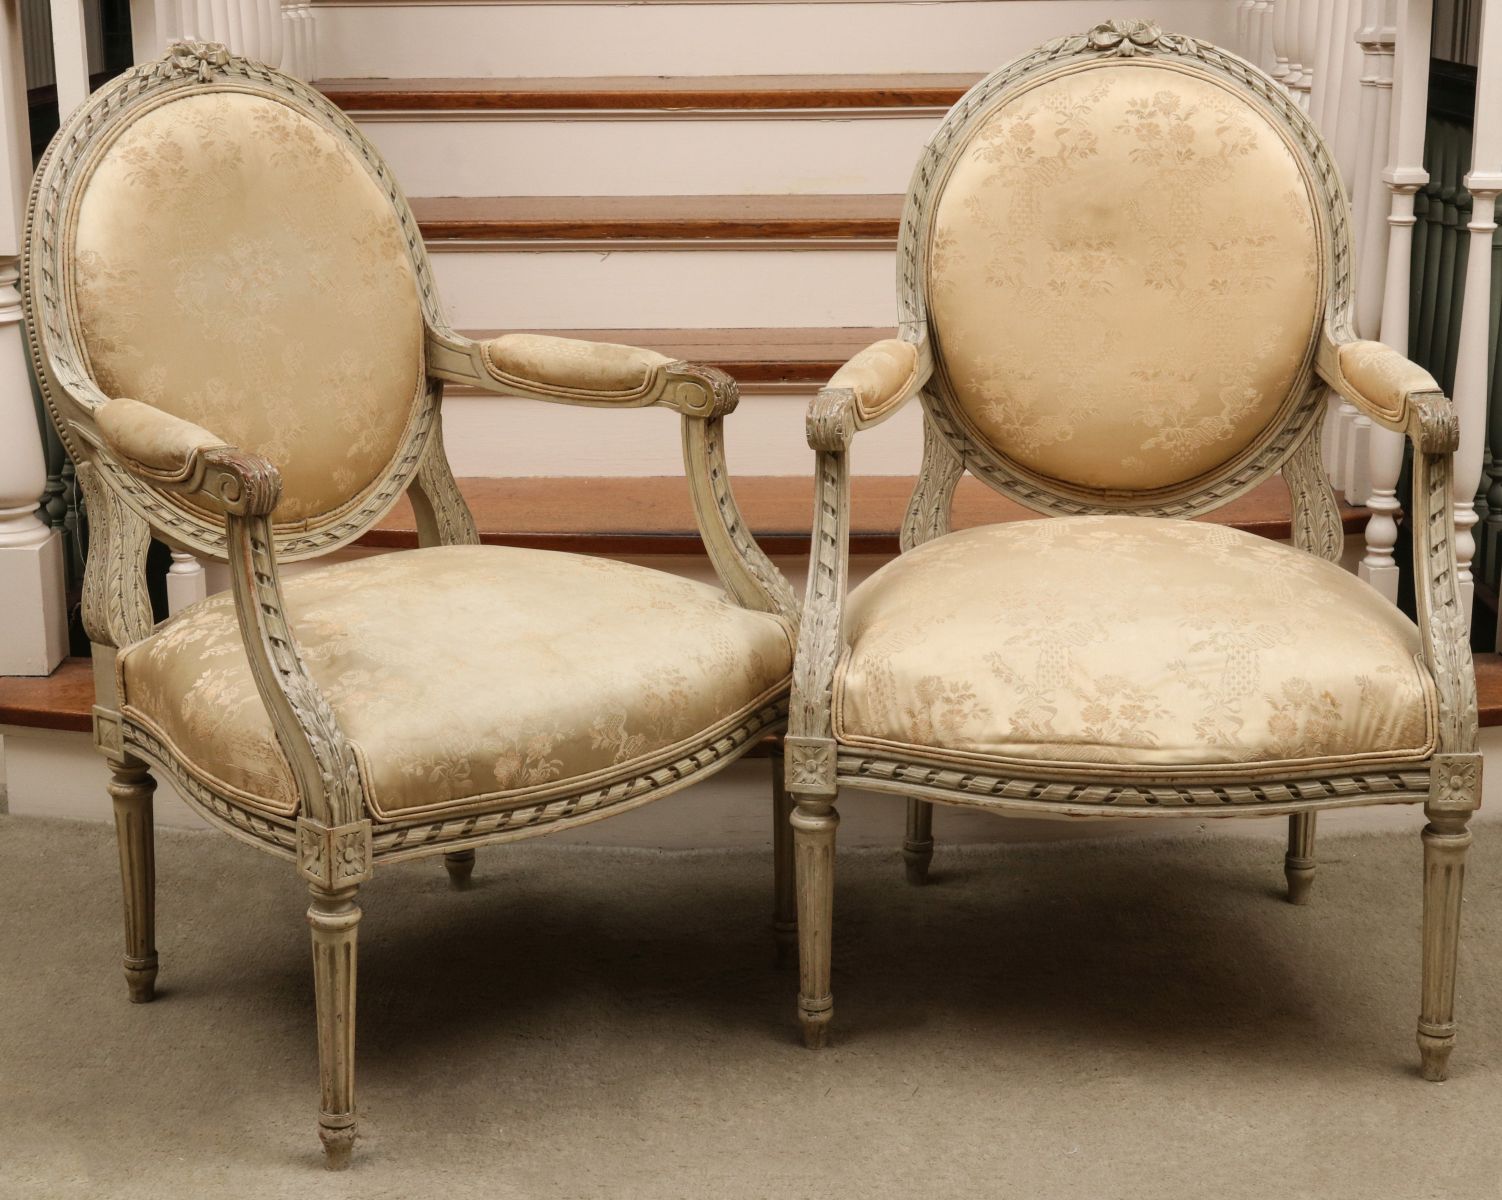 A PAIR LOUIS XVI STYLE OPEN ARM FAUTEUIL CHAIRS